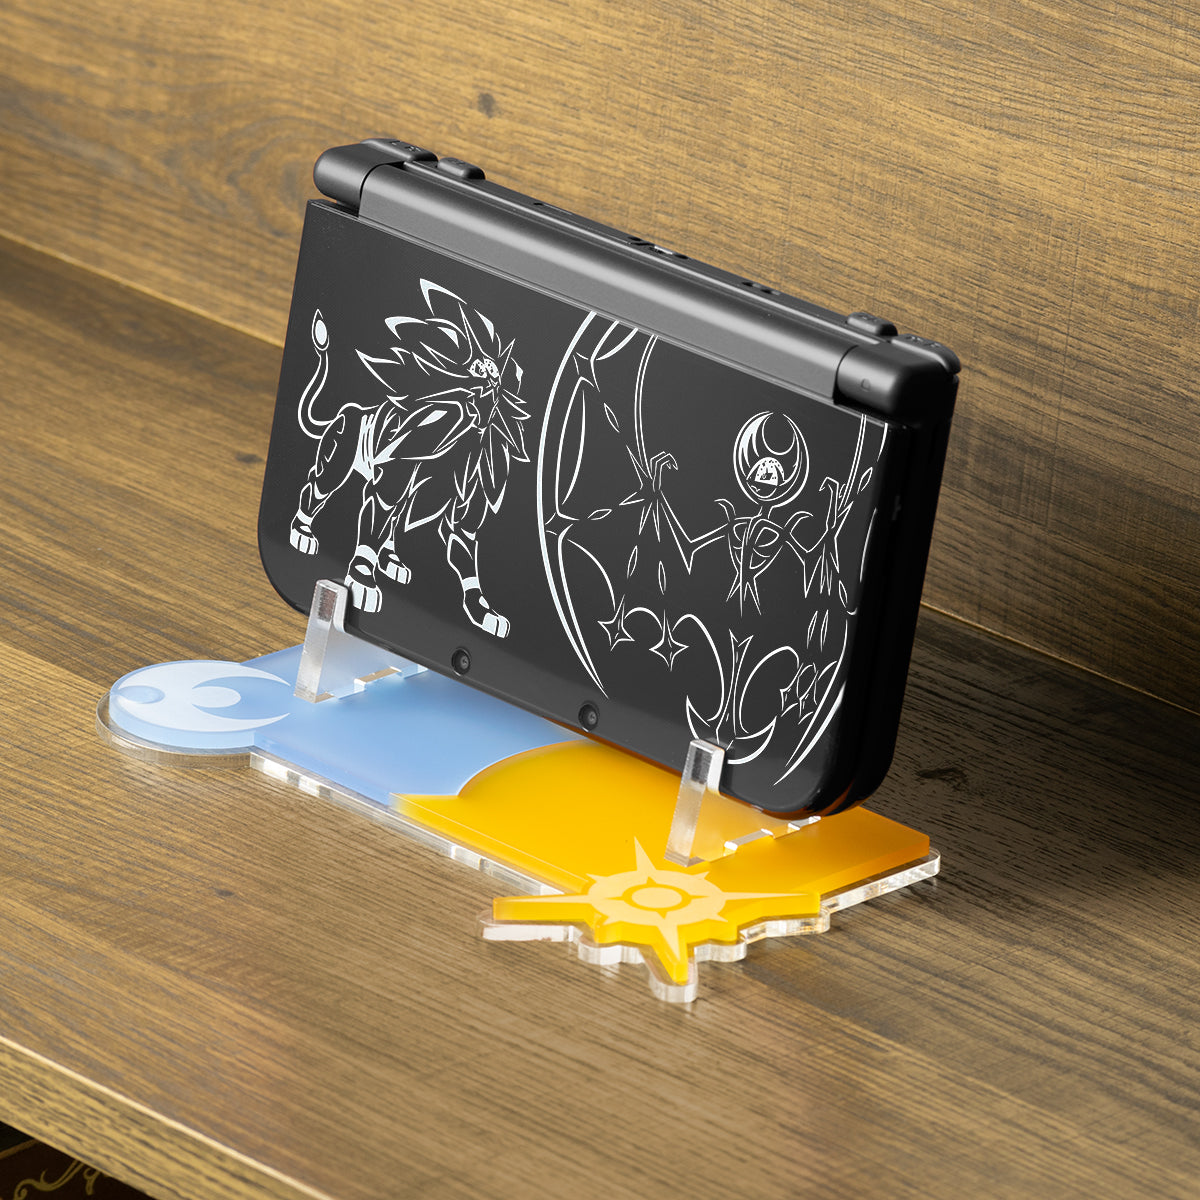 Pokémon Sun and Moon Edition New 3DS Display – Gaming